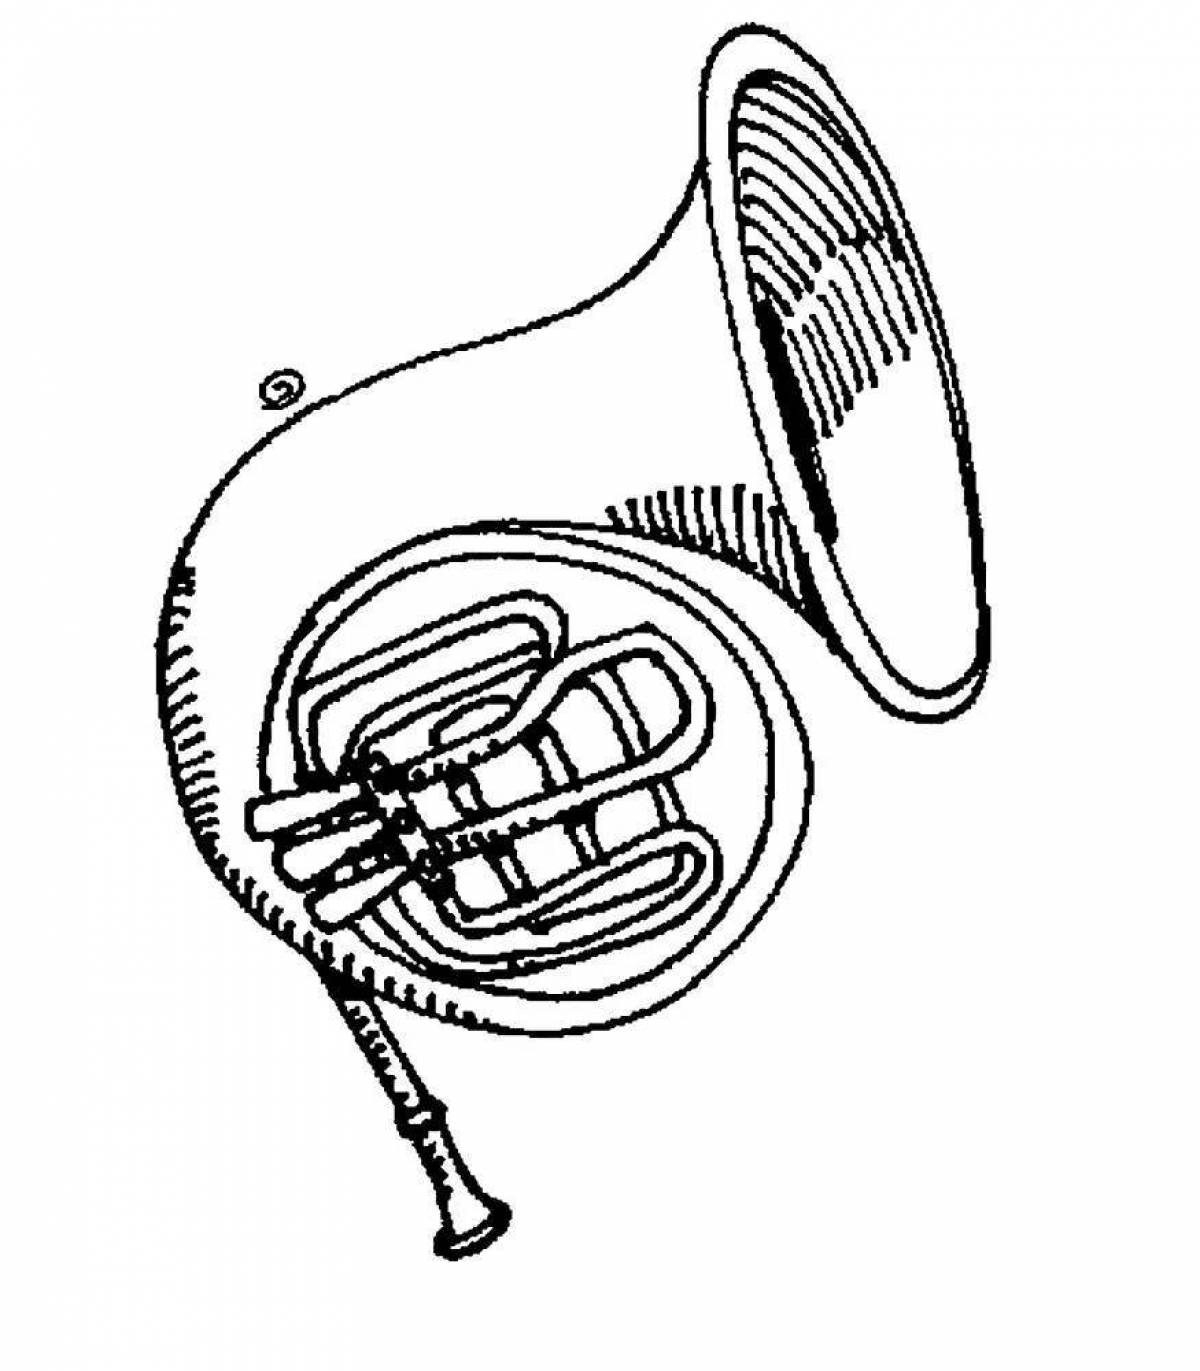 Coloring page amazing wind instruments